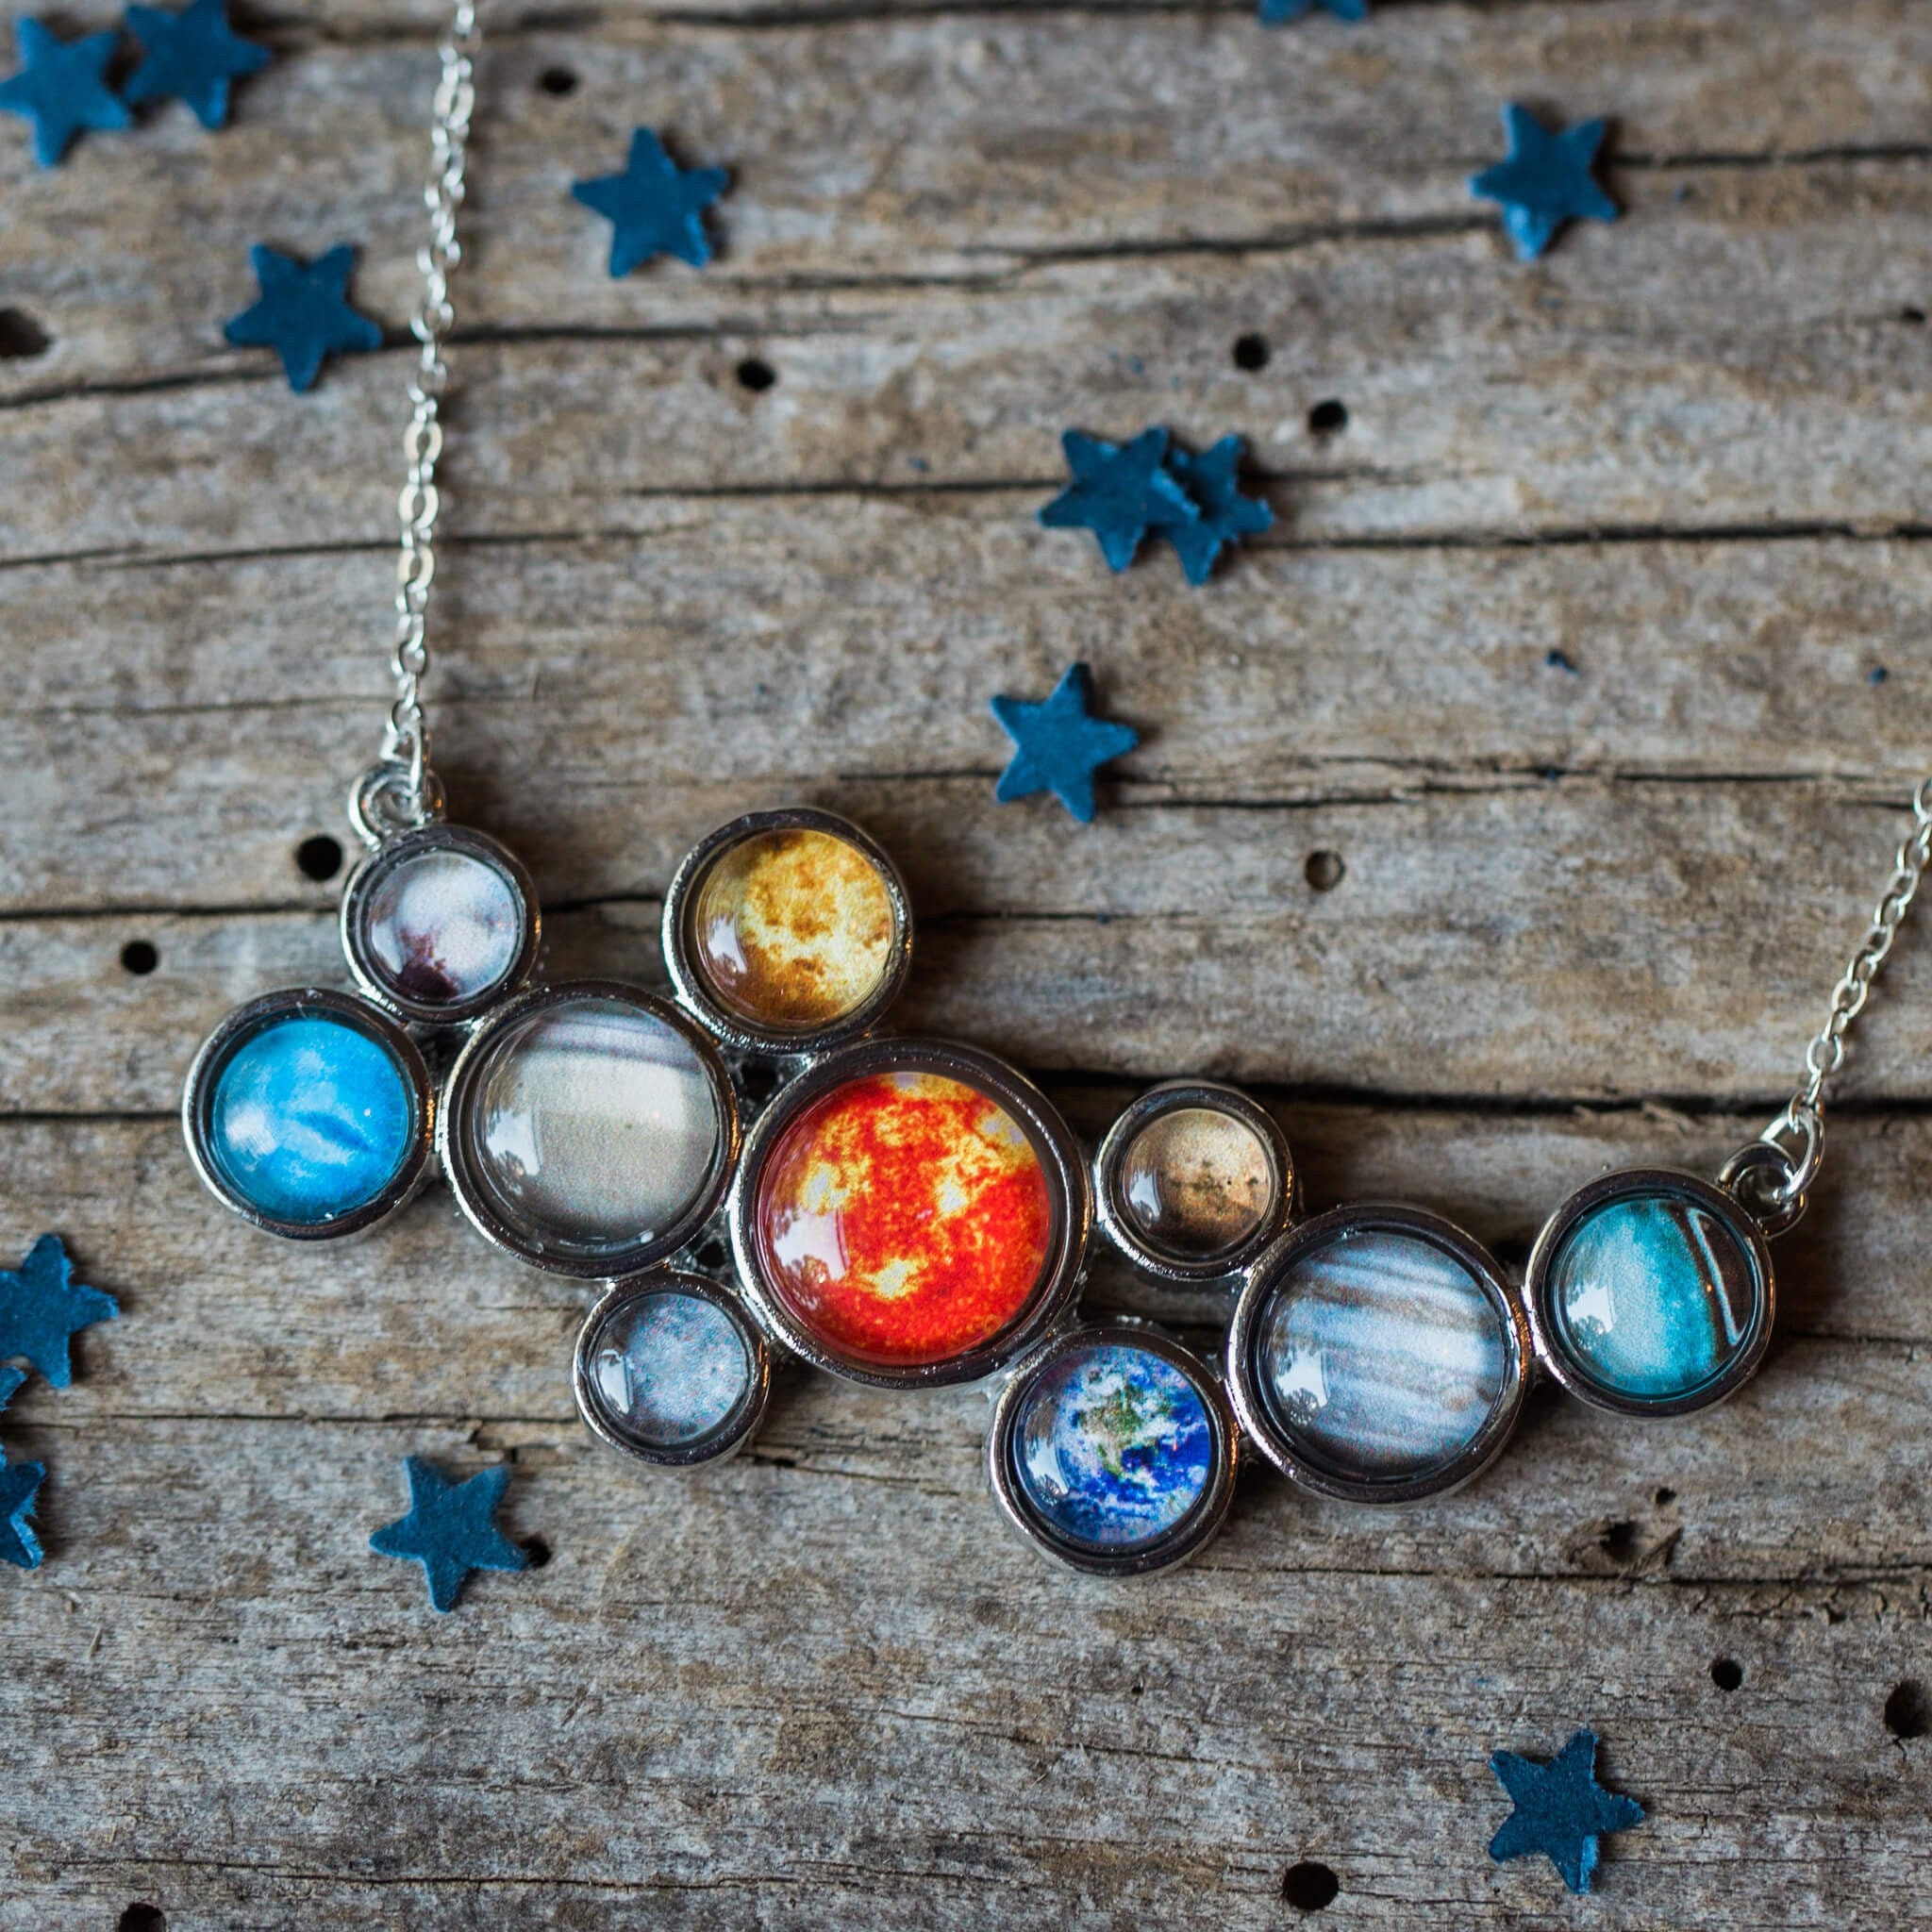 Solar System Aligned Planet/Star Science Necklace | Science necklaces,  Beautiful necklaces, Star and moon necklace